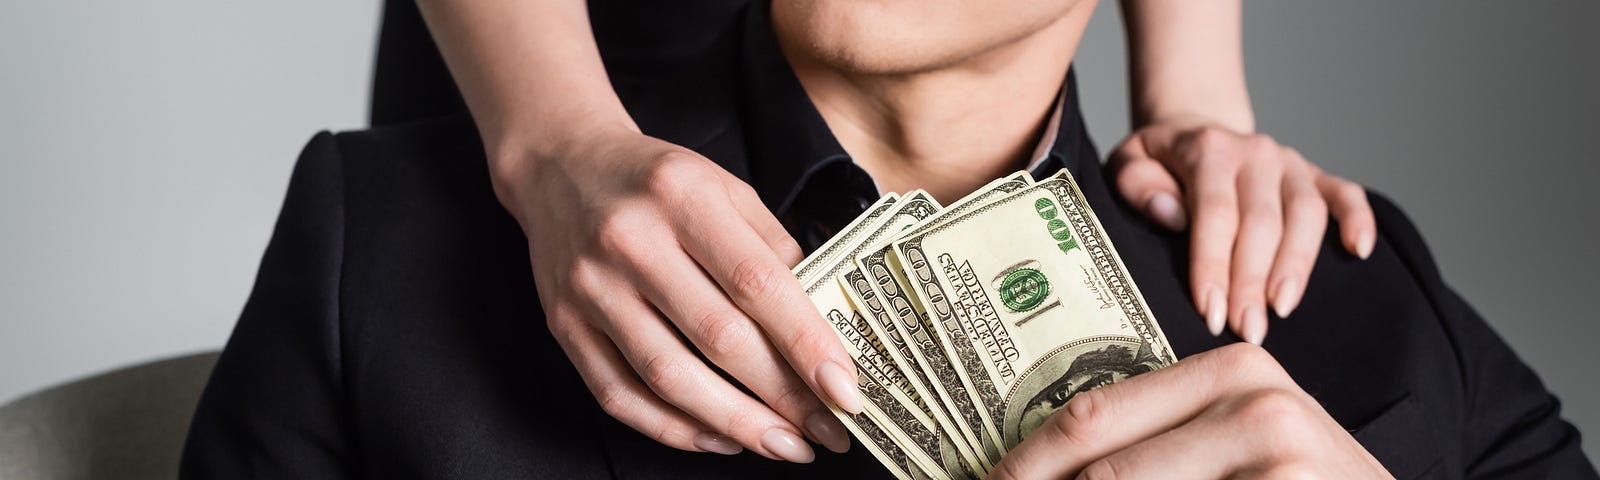 A man in a black suit sitting on a couch holding money as a woman leans over and grabs some of the dollar bills for transactional sex